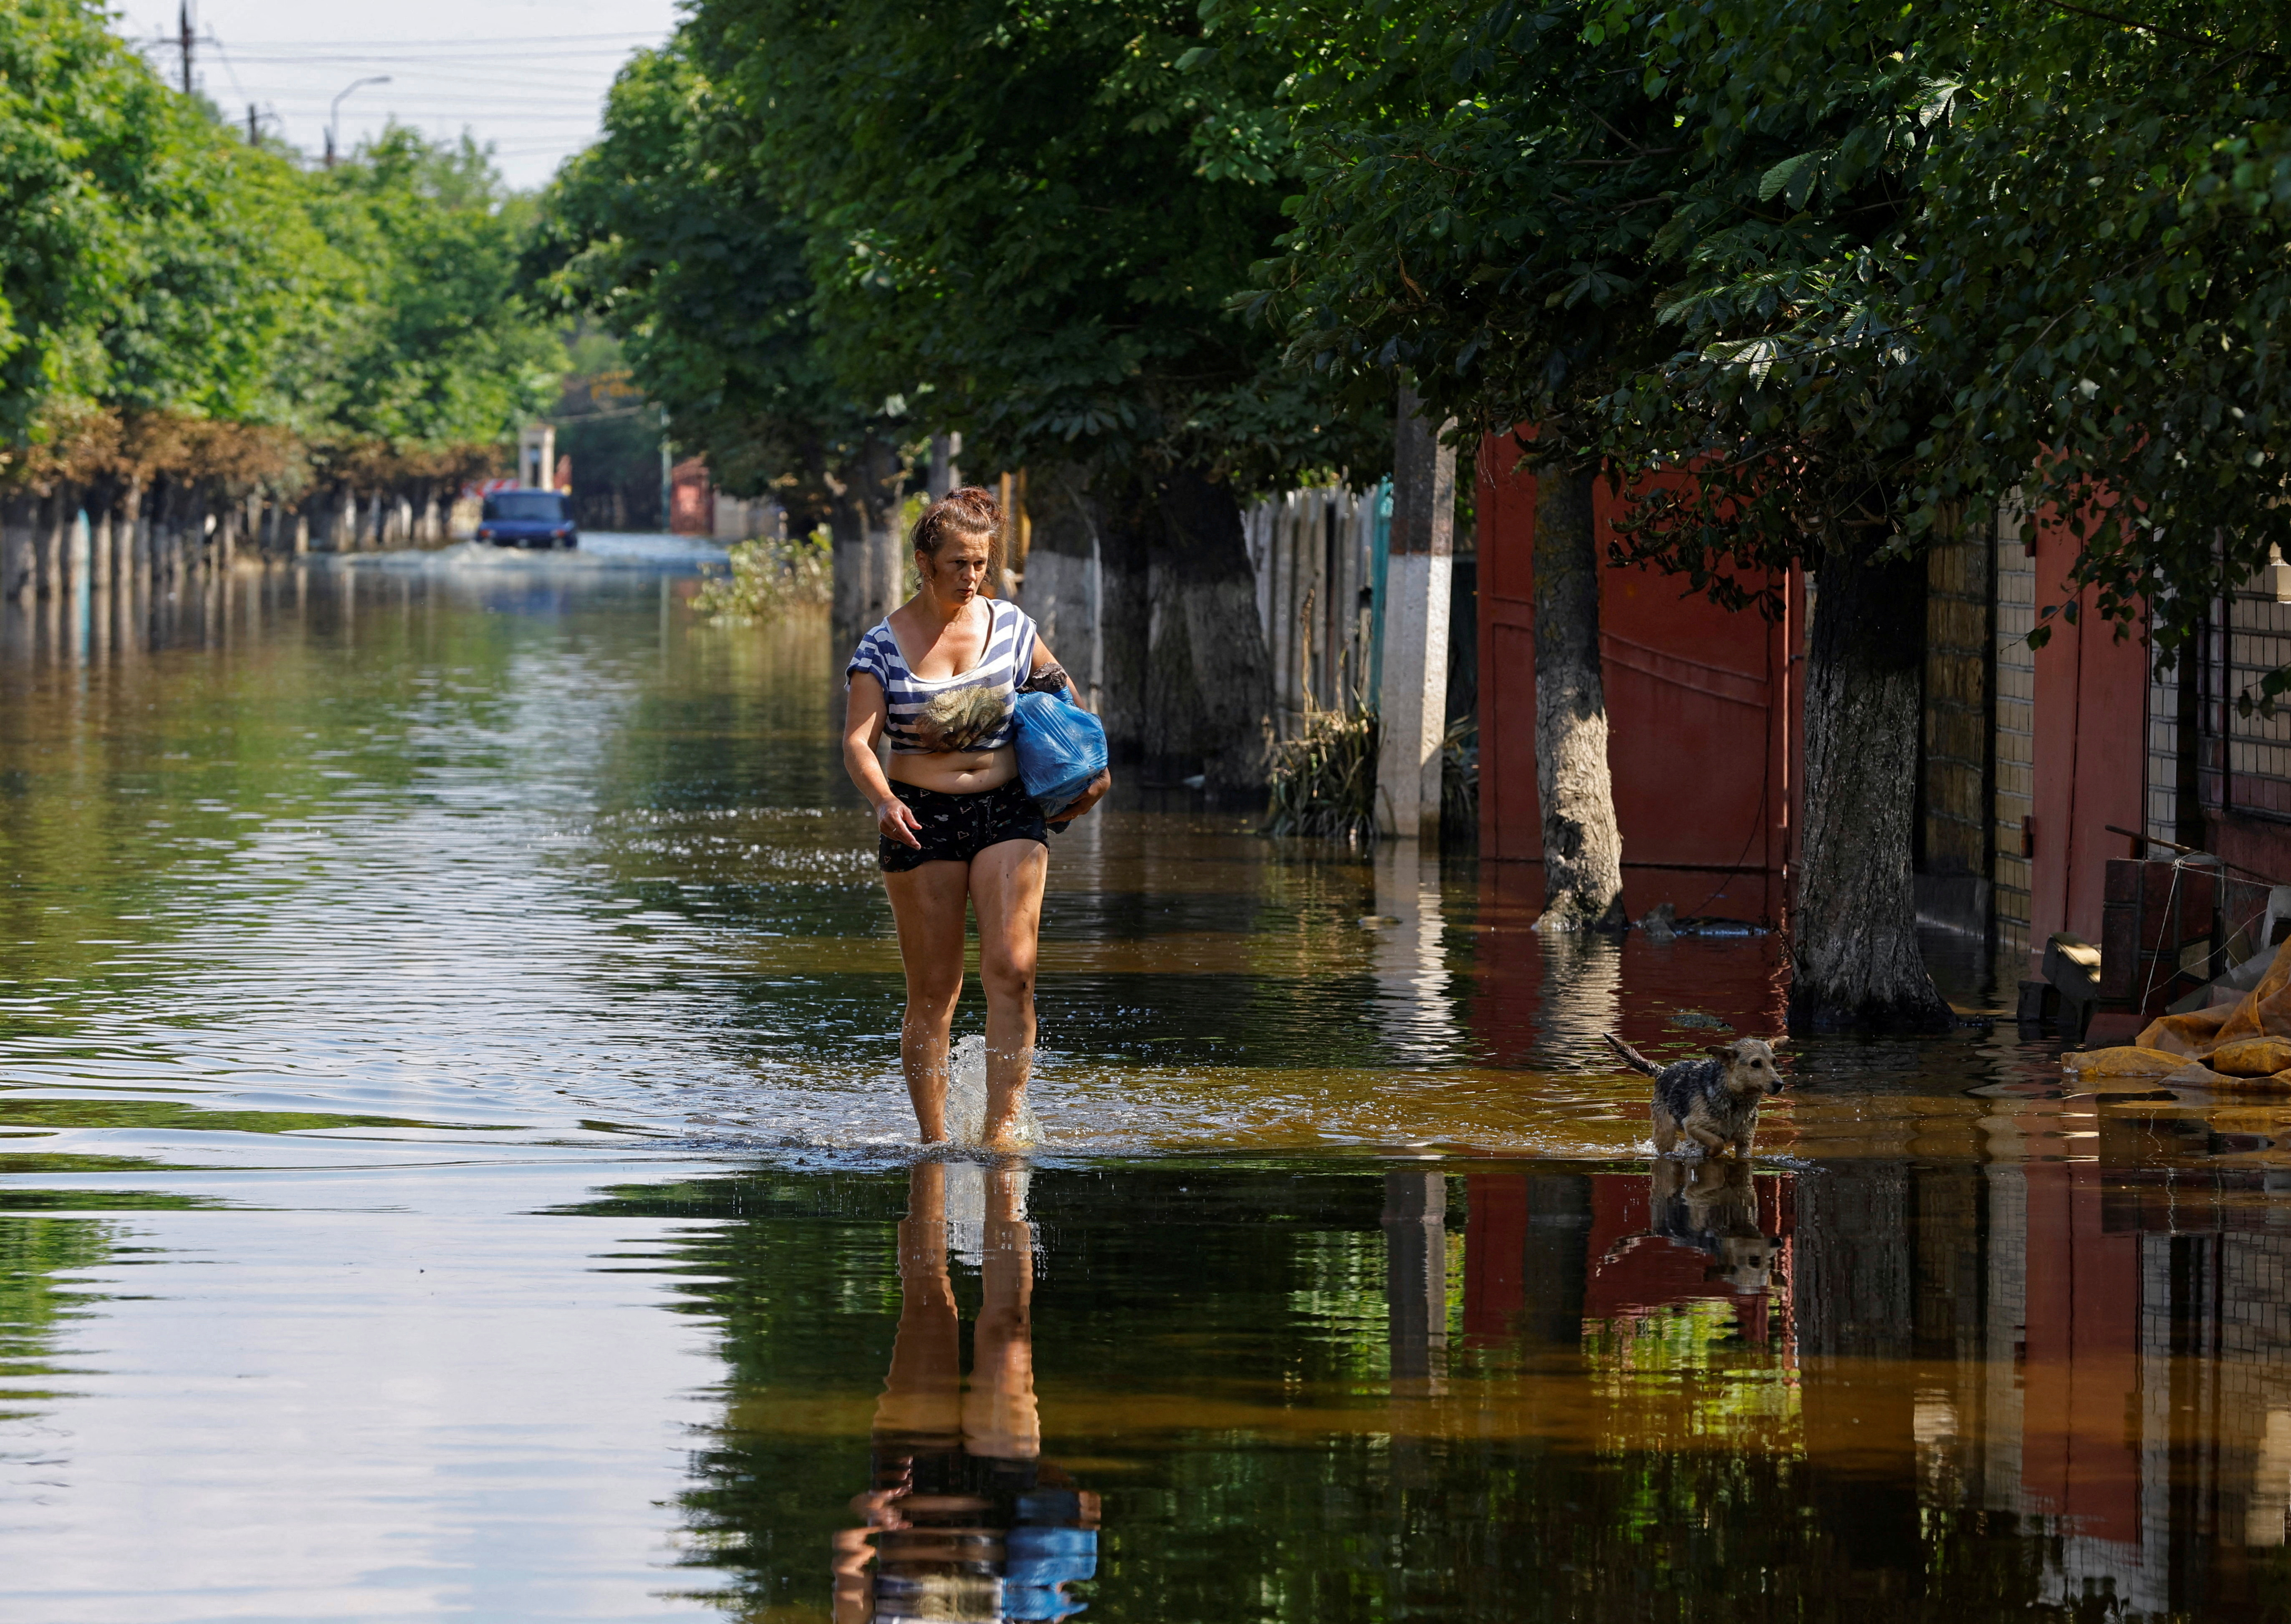 A woman walks along a street after floodwaters receded in Hola Prystan